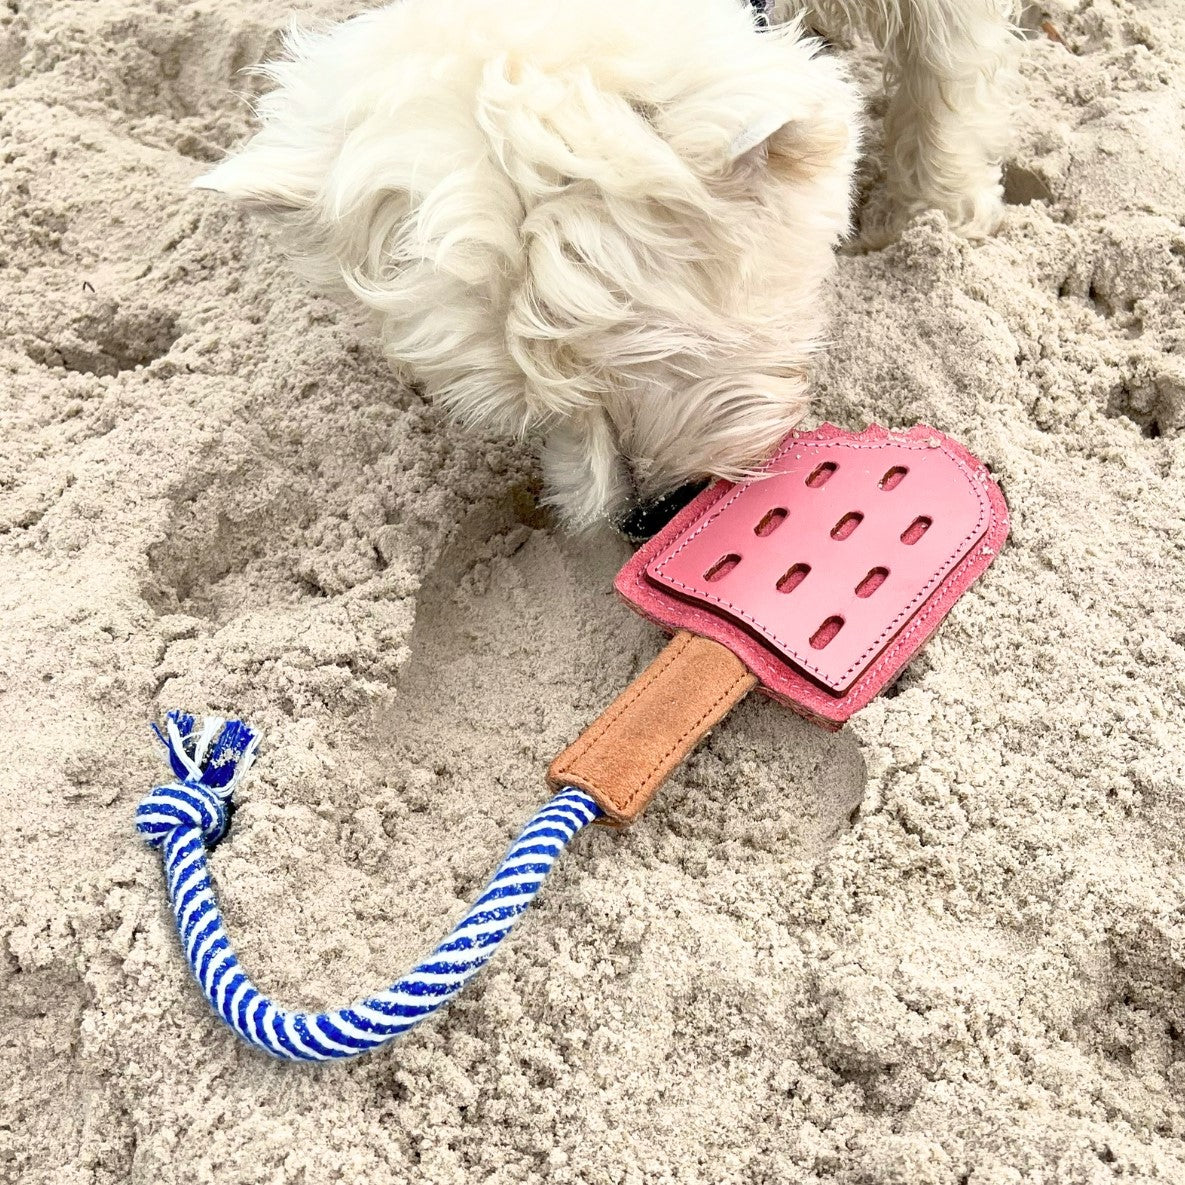 A fluffy white dog curiously sniffs at a Georgie Paws Icy Pole - pink dog toy partially buried in the sand, designed for teething puppies and featuring a buffalo leather and suede blue and white rope.